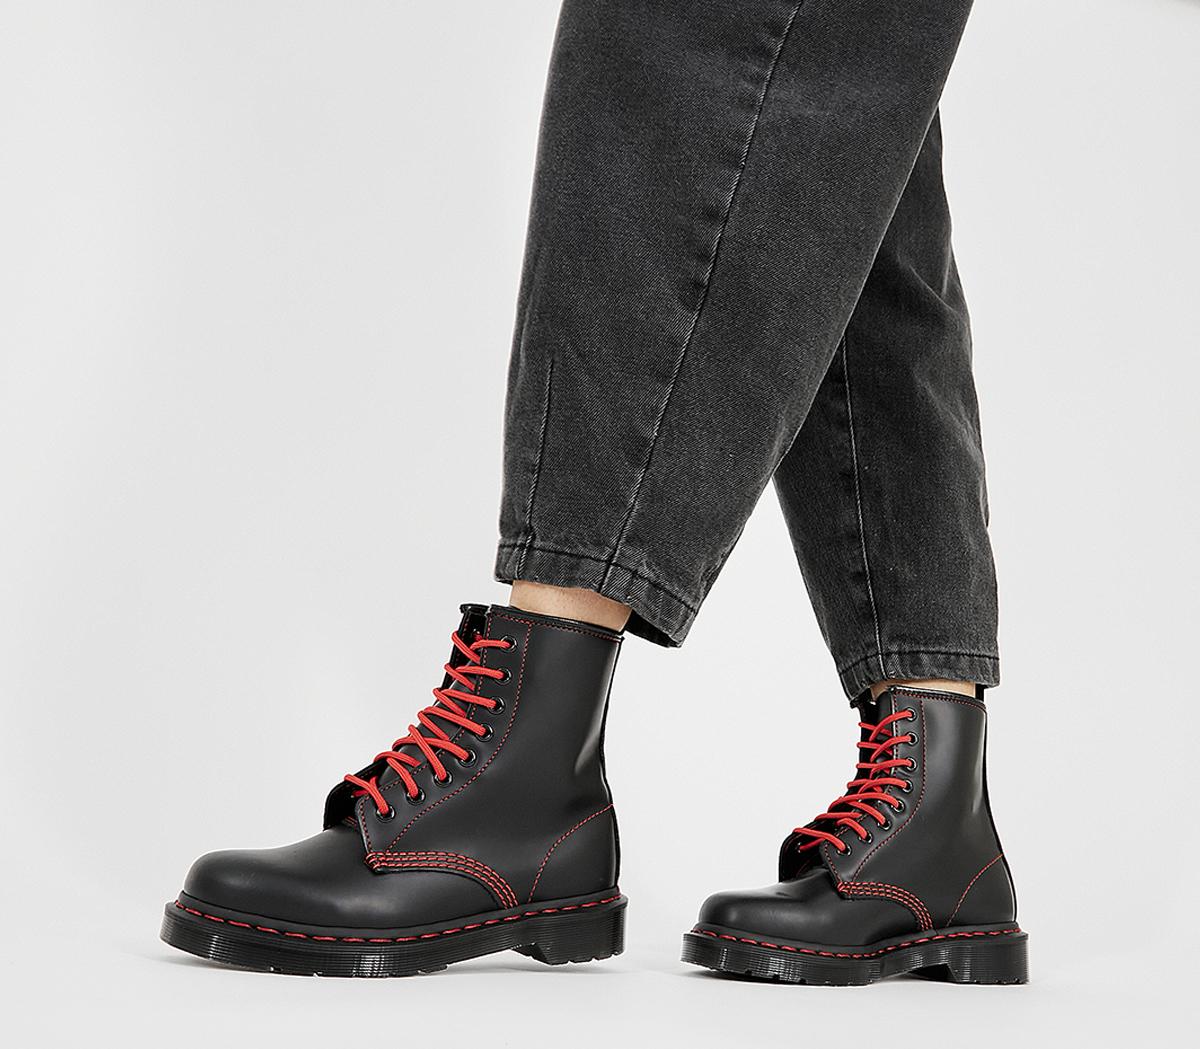 Boots Black Red Stitch - Ankle Boots